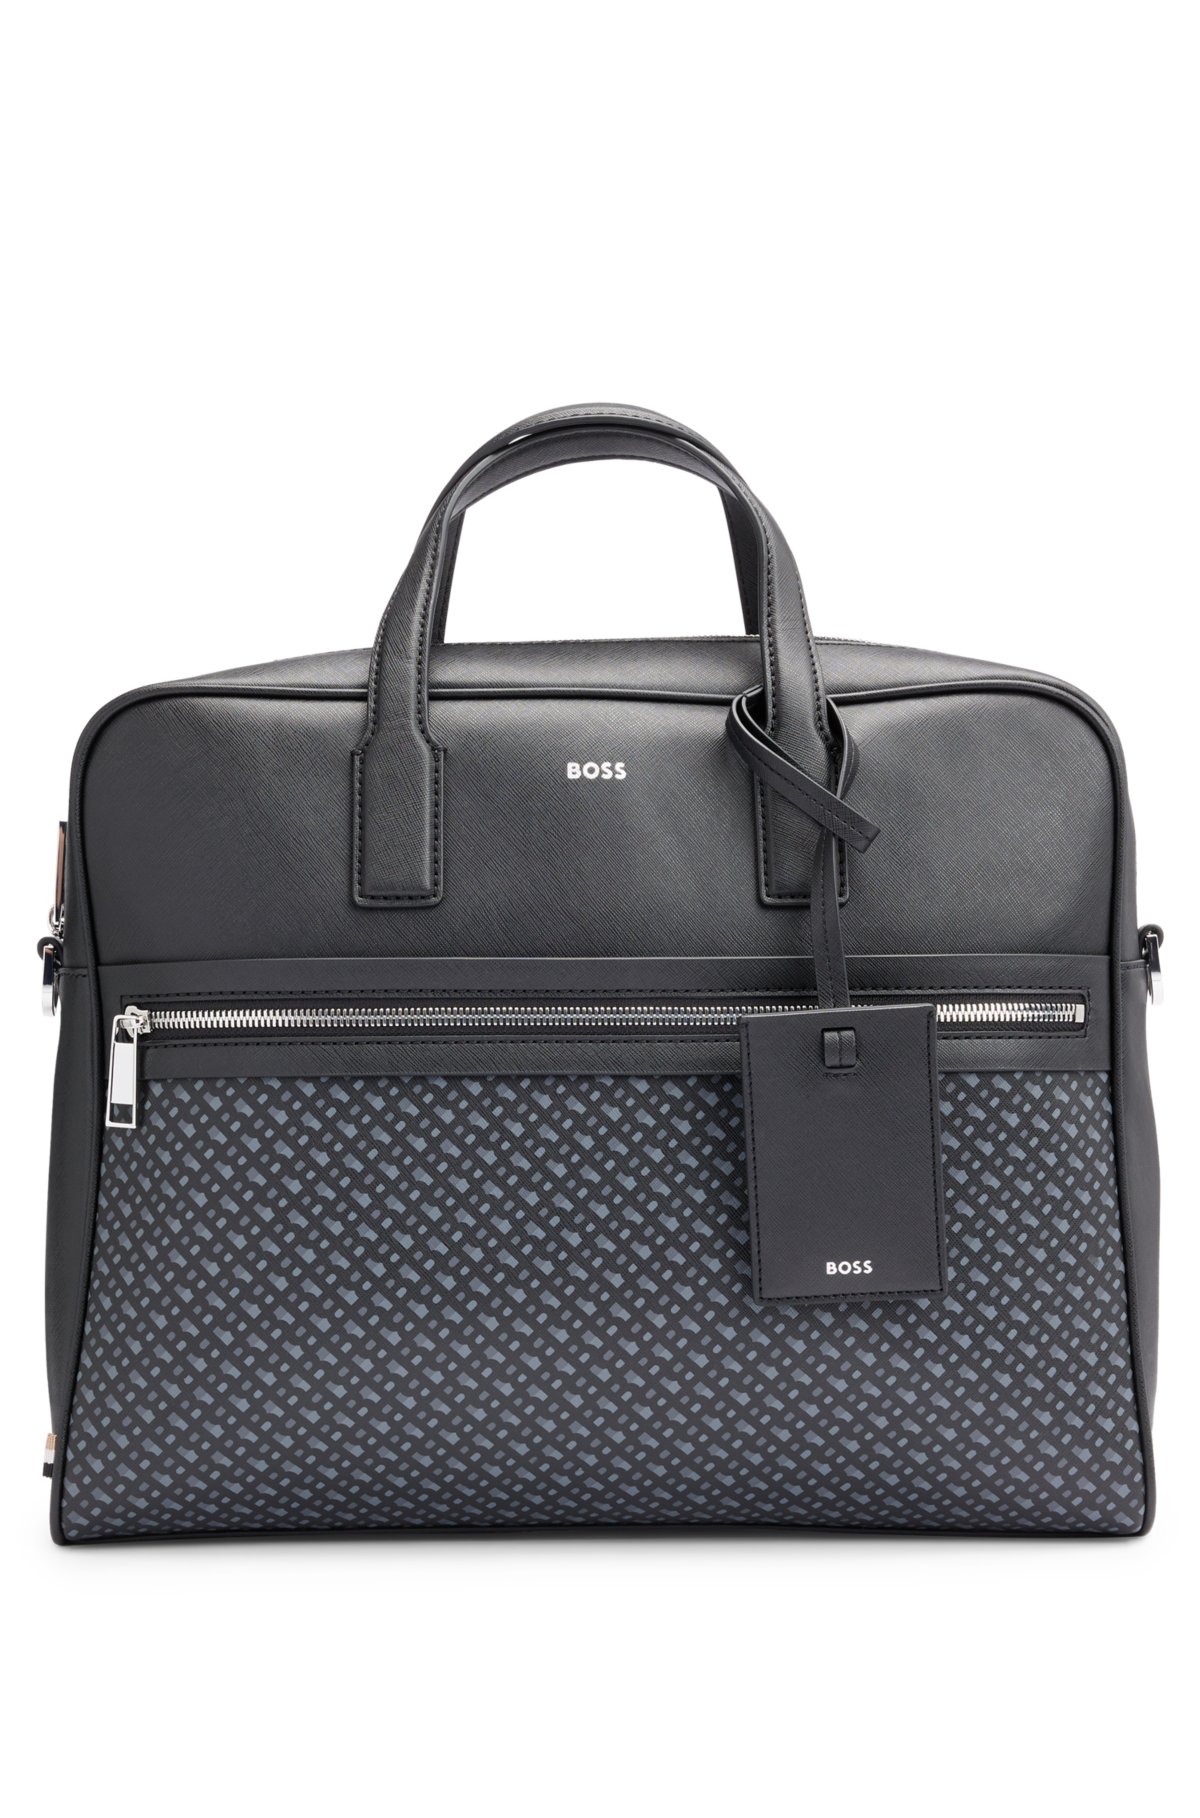 detailing case monogram BOSS document Structured - with